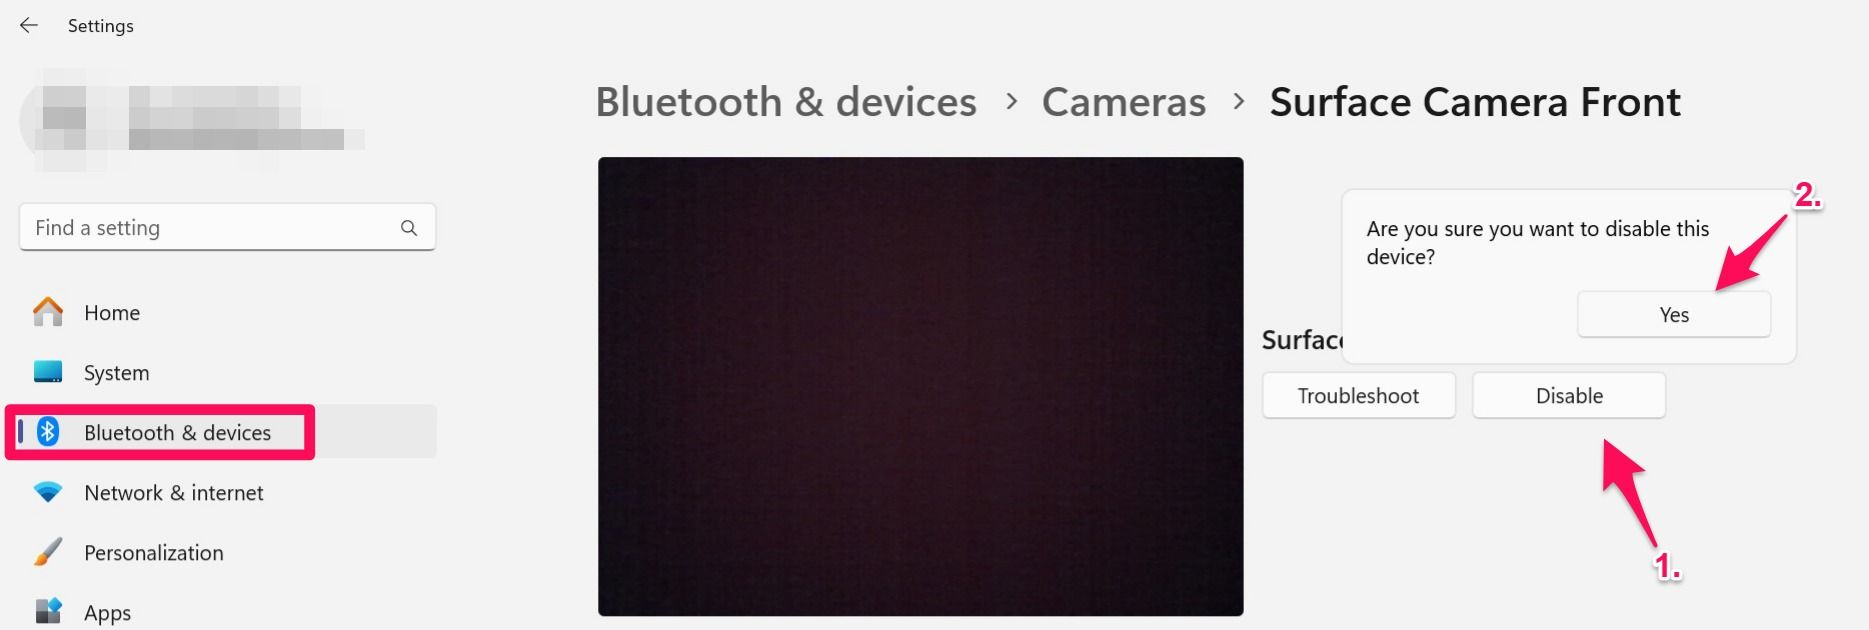 Disabling a camera device in the camera settings on windows 11